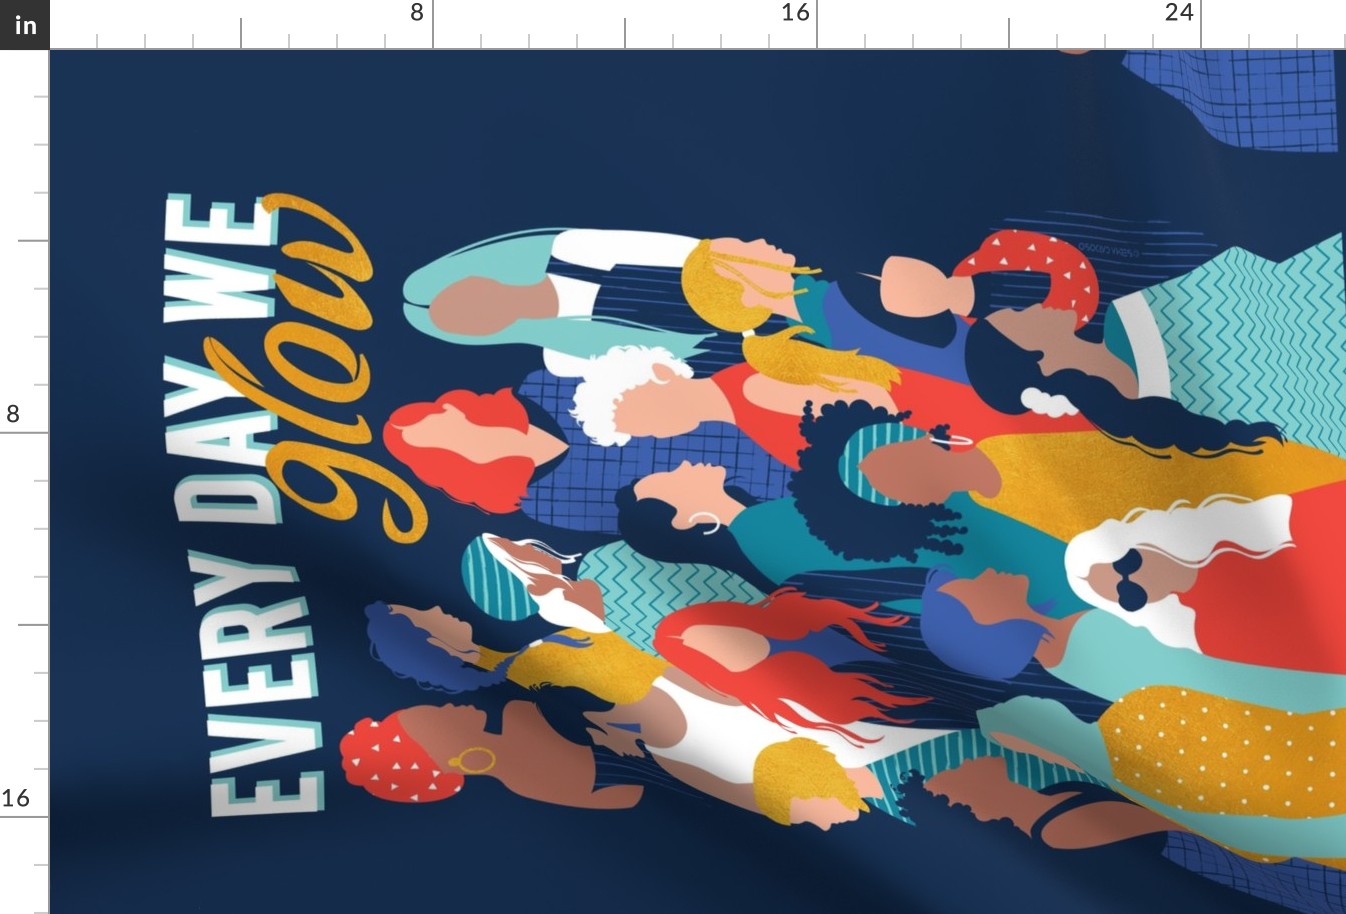 Every day we glow International Women's Day wall hanging or tea towel // midnight navy blue background teal, mint, electric blue neon orange red and gold humans 